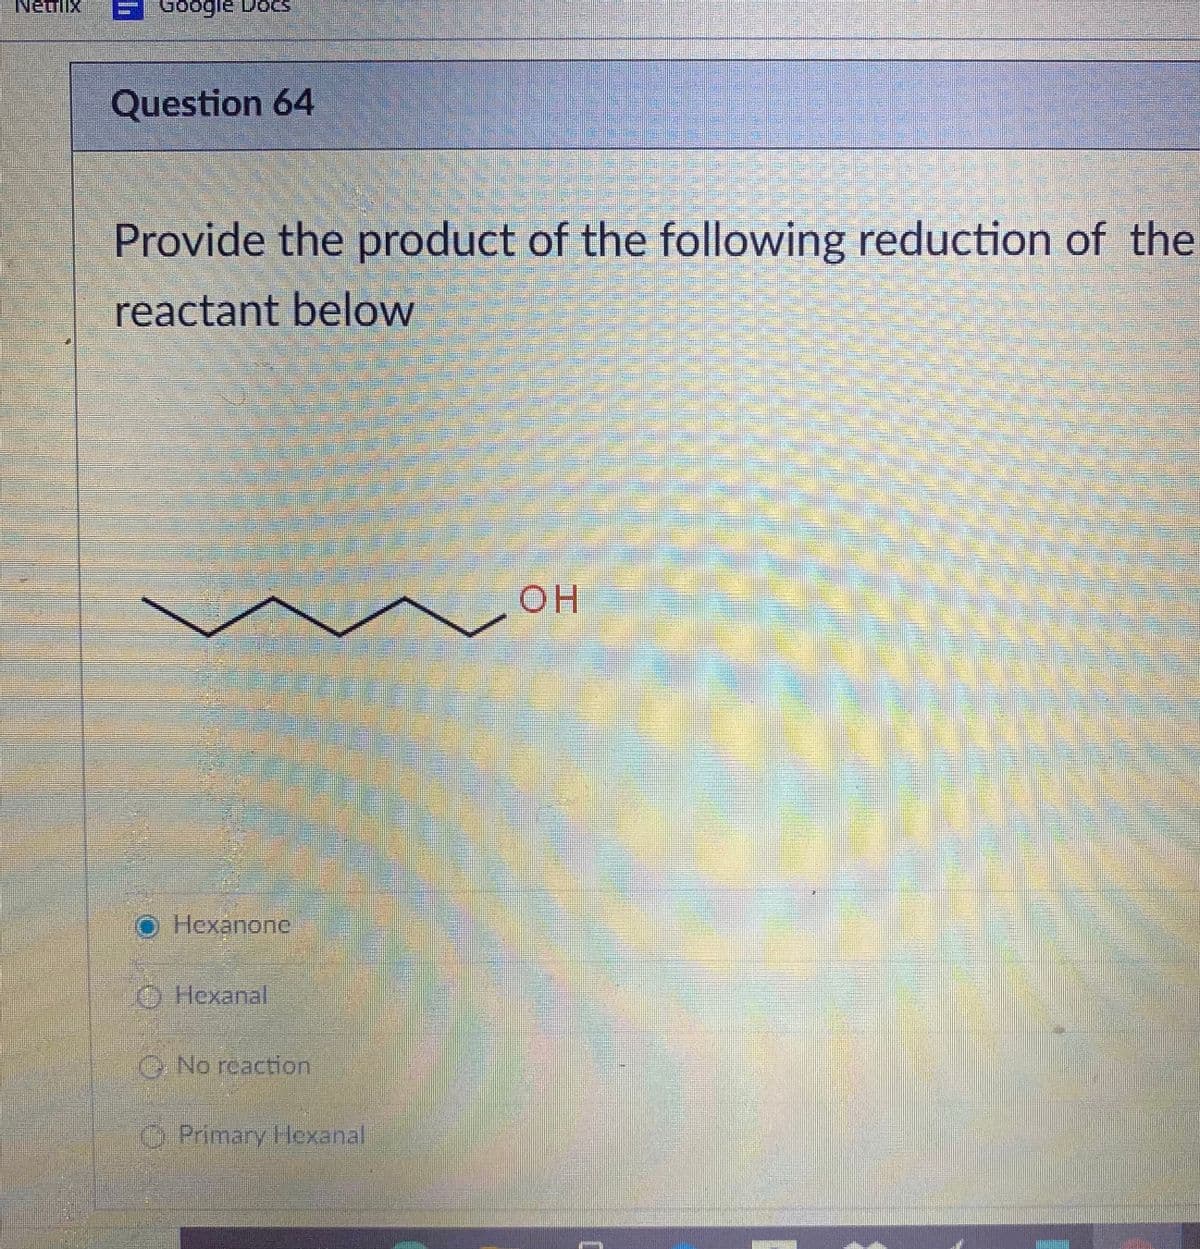 Netflix
Google DoCS
Question 64
Provide the product of the following reduction of the
reactant below
OH
Hexanone
O Hexanal
O No reaction
O Primary Hexanal
